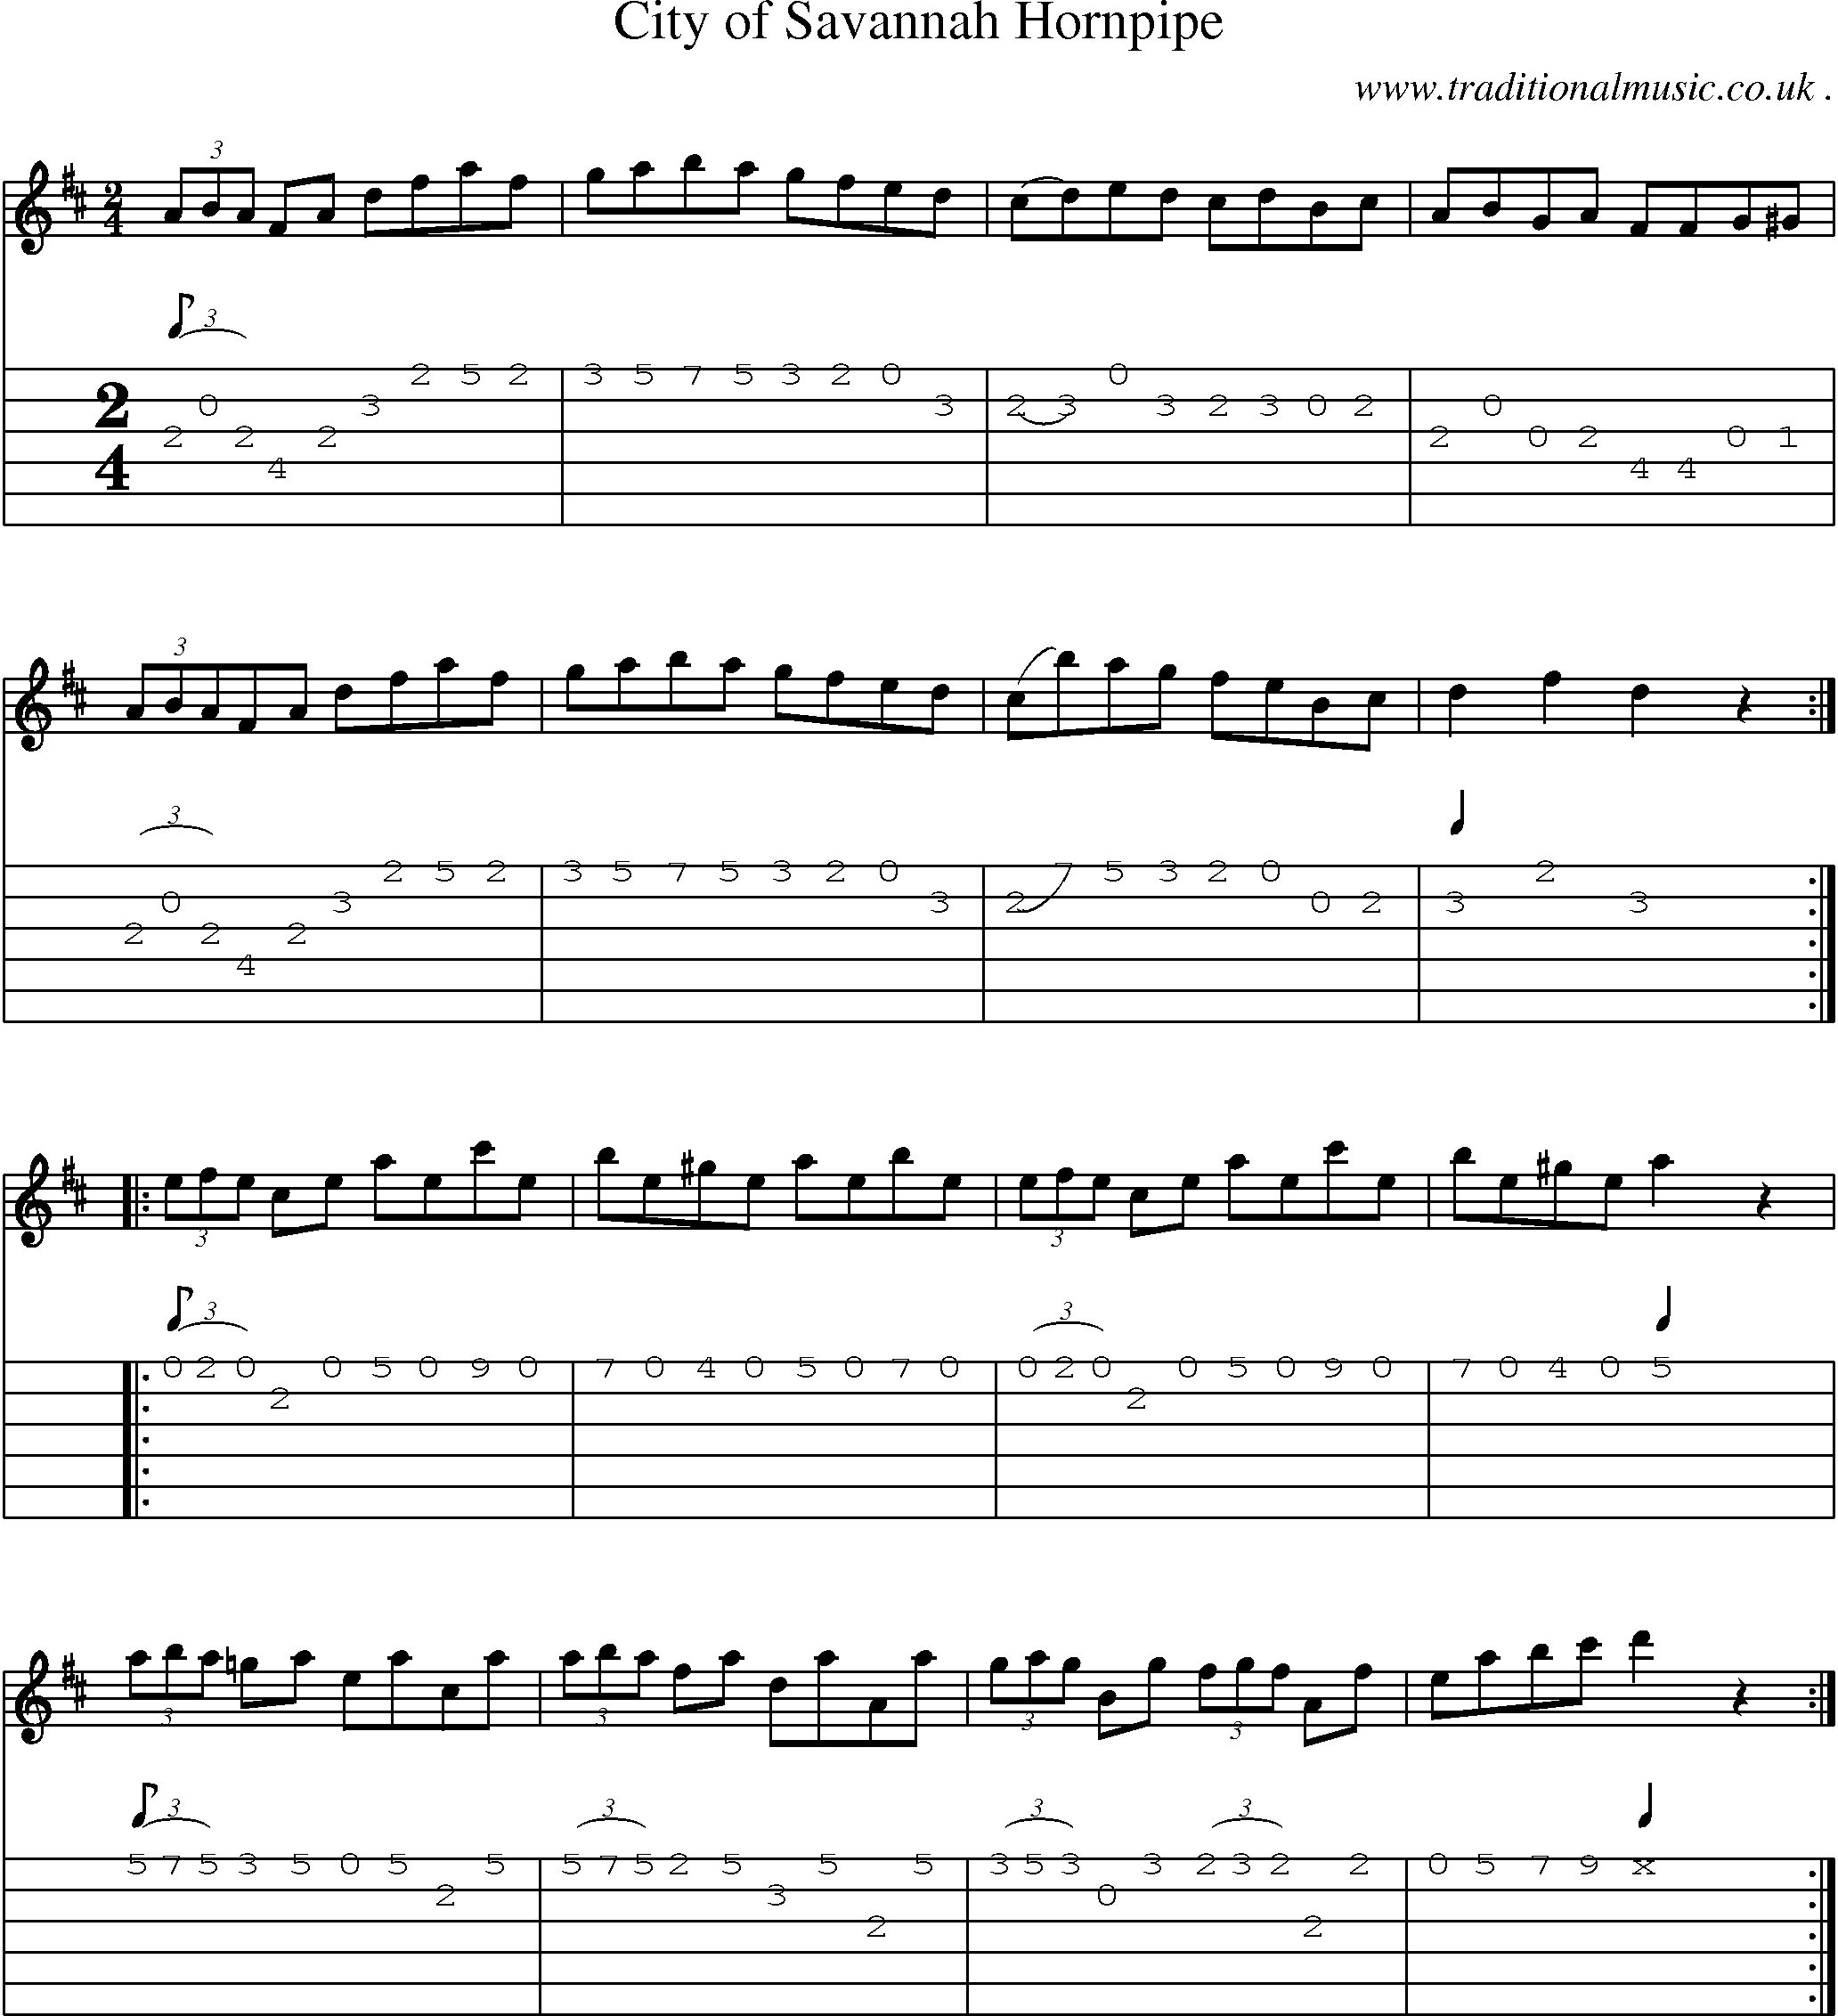 Music Score and Guitar Tabs for City Of Savannah Hornpipe